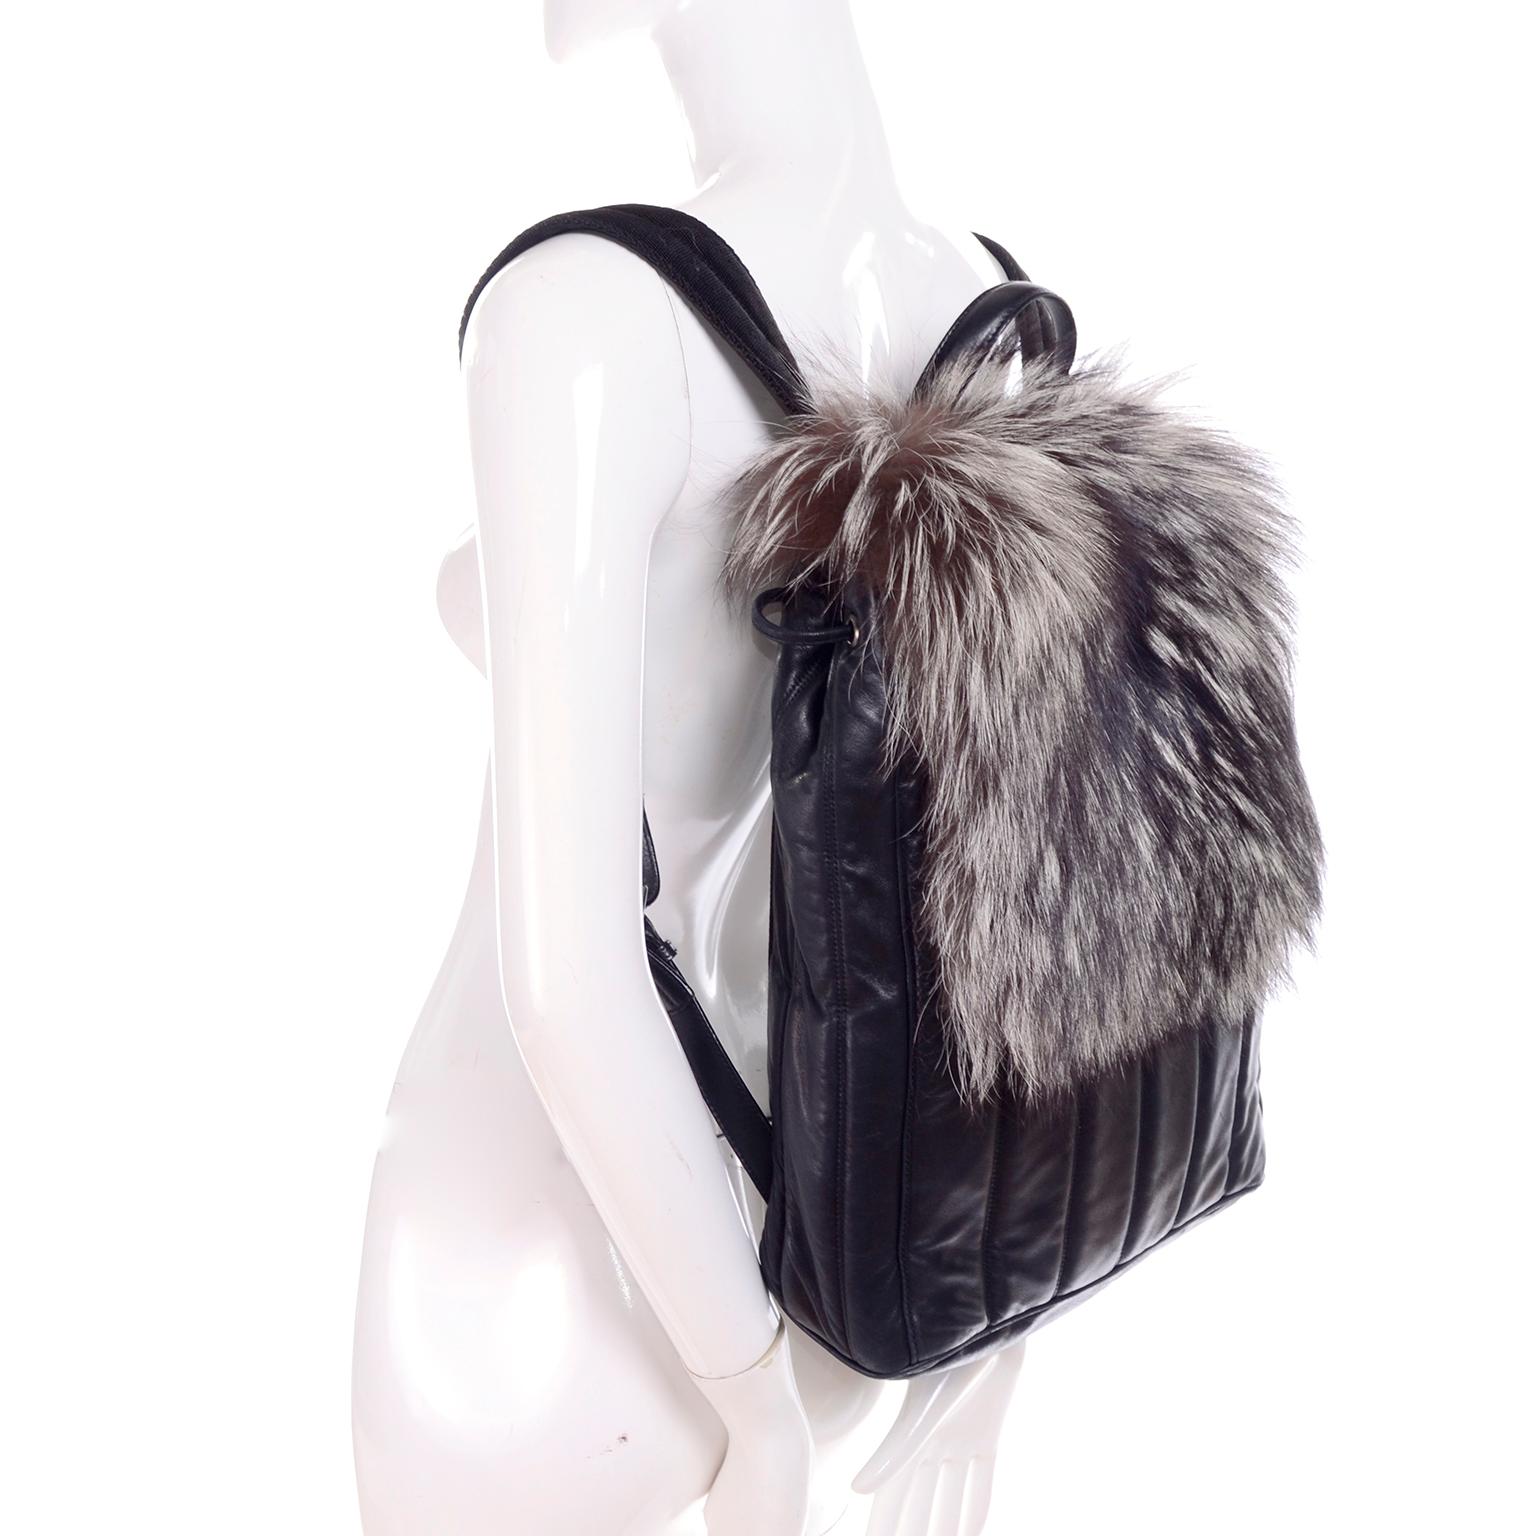 This is an absolutely fabulous Tanner Krolle black leather backpack with gorgeous fox fur.  The bag measures 16 inches high, 12 inches wide and 4 inches deep. This versatile bag  has leather straps, a drawstring at the top, an outside side pocket,